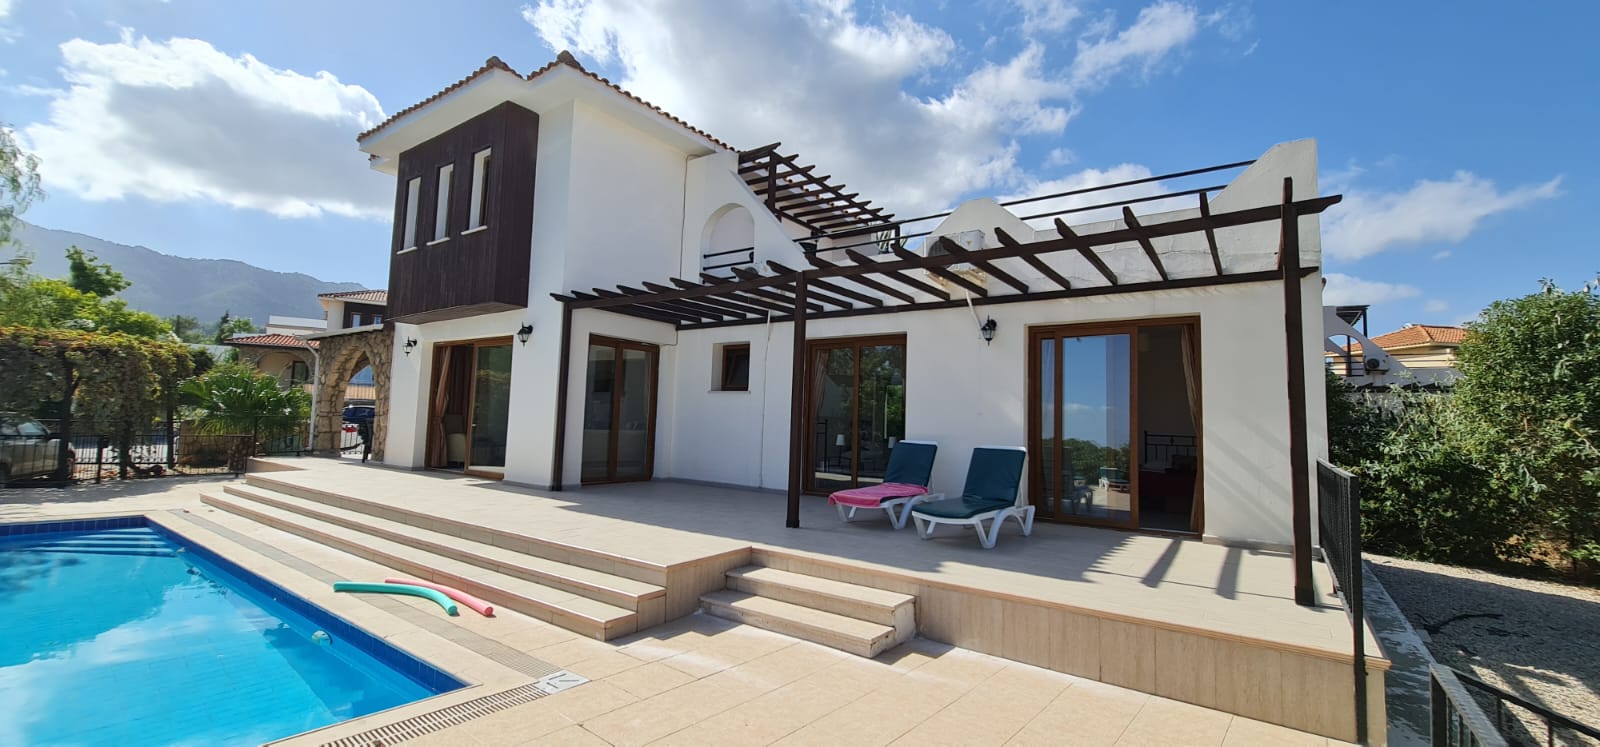 3 bedroom dream home in the picturesque village of Karaagac, Esentepe